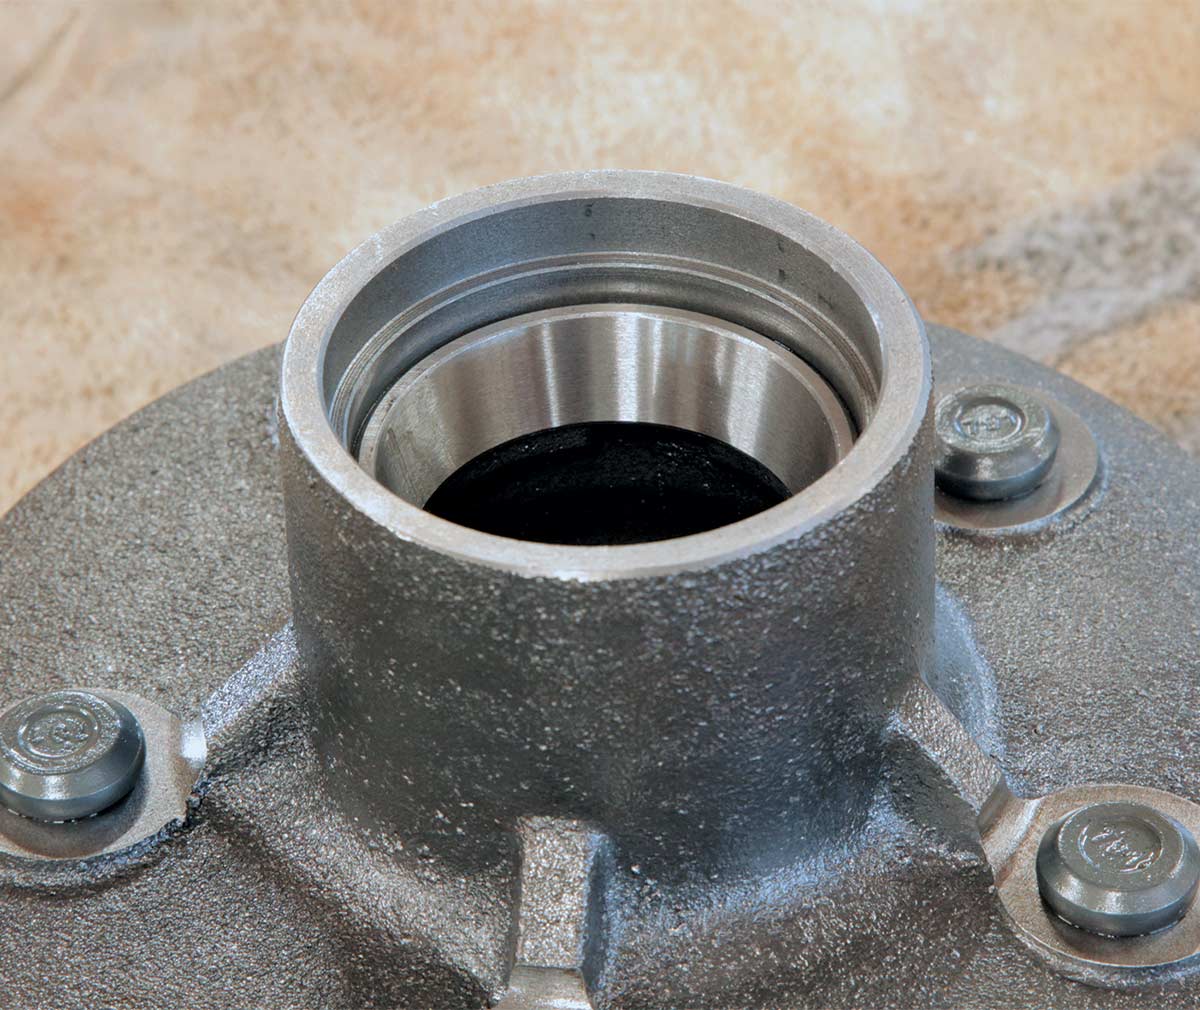 Evenly tapping the bearing race into the 5×5.5 lug pattern wheel hub